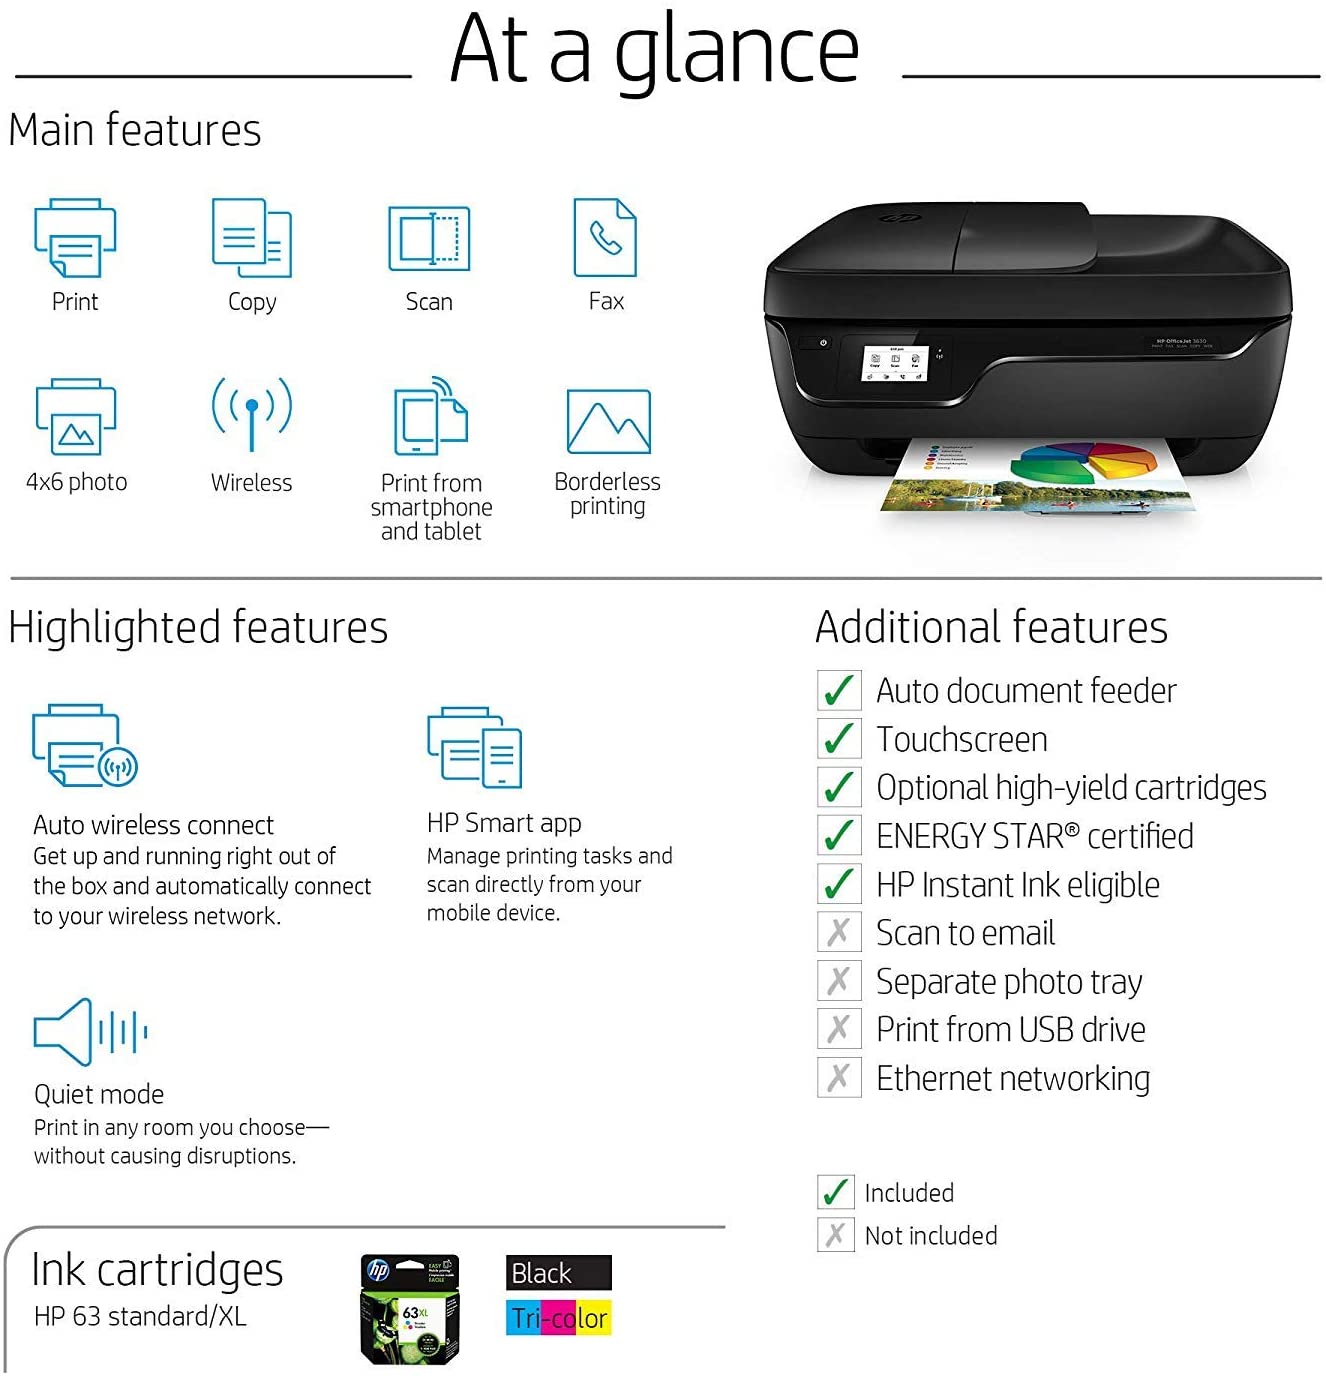 HP OfficeJet 3830 All-in-One Wireless Printer : print, copy,scan, fax (K7V40A) - image 2 of 4